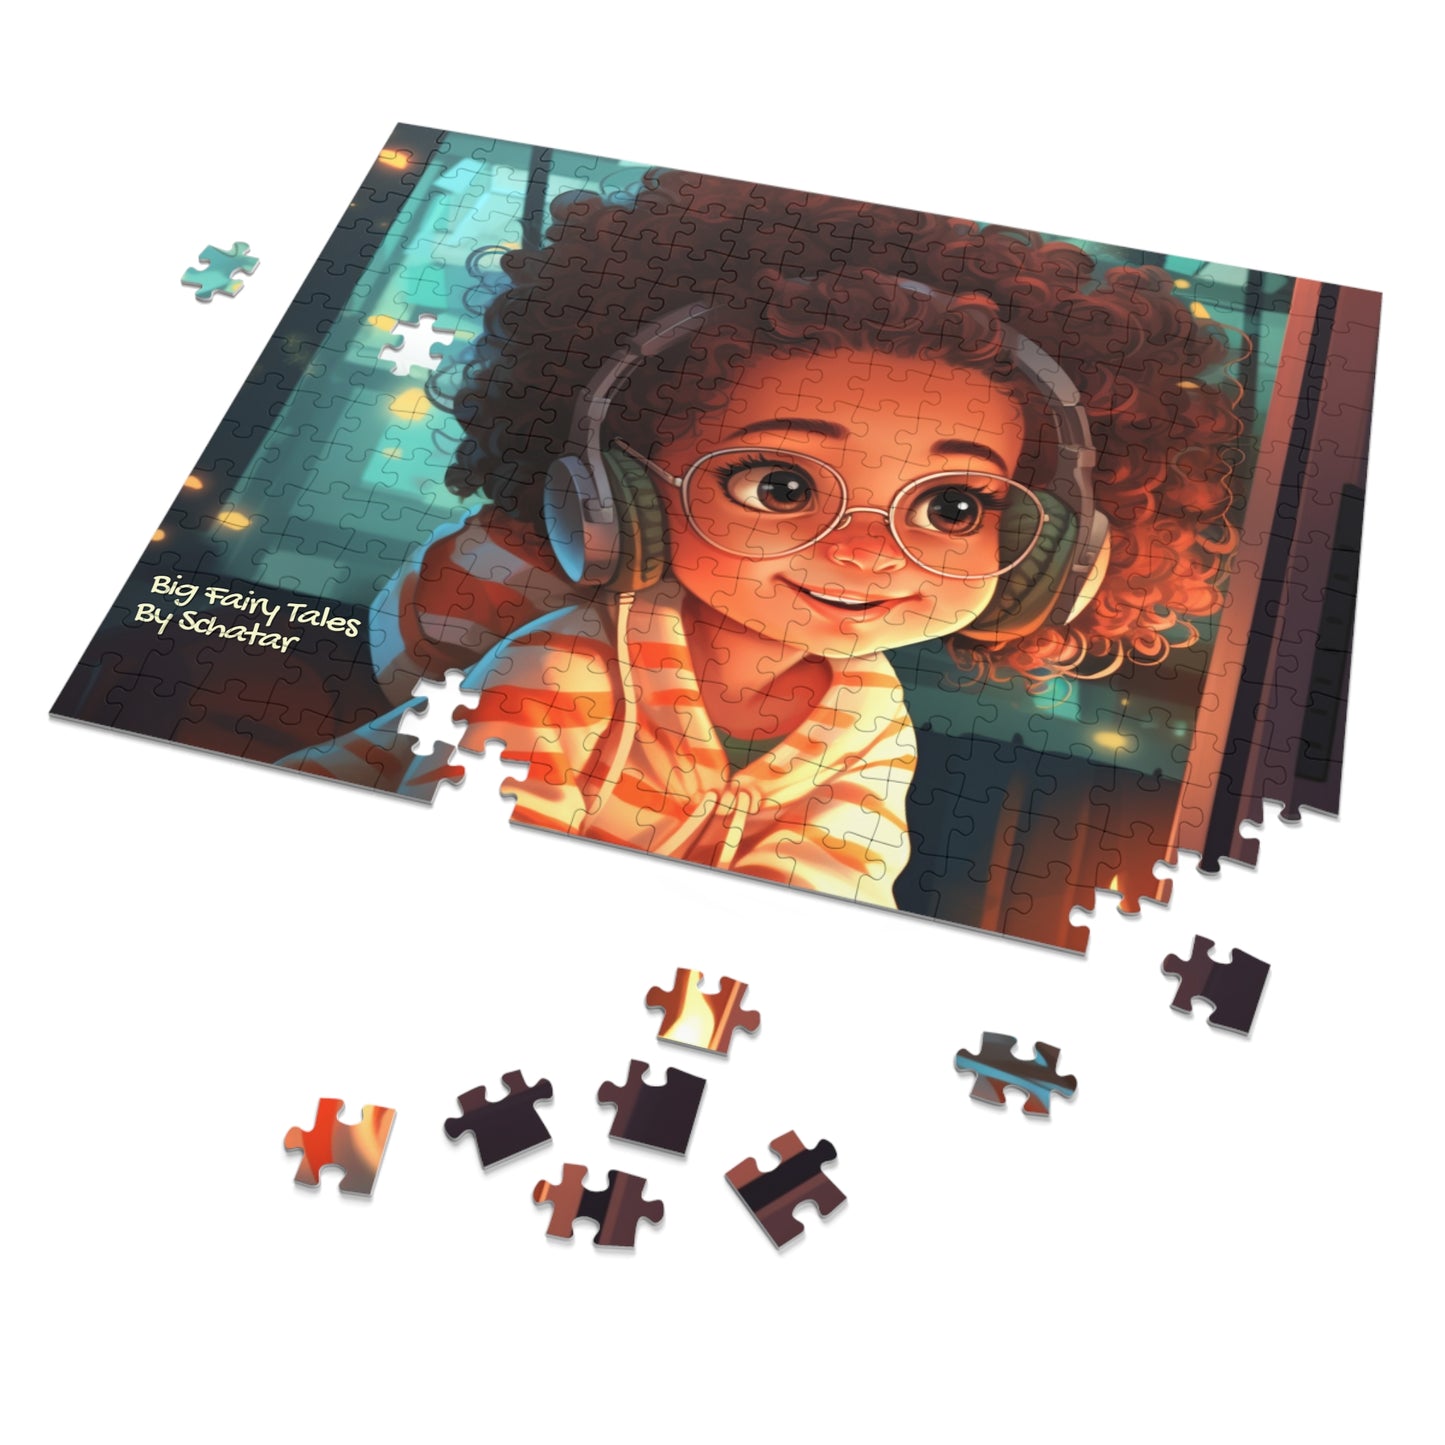 Multimedia Producer - Big Little Professionals Puzzle 17 From Big Fairy Tales By Schatar